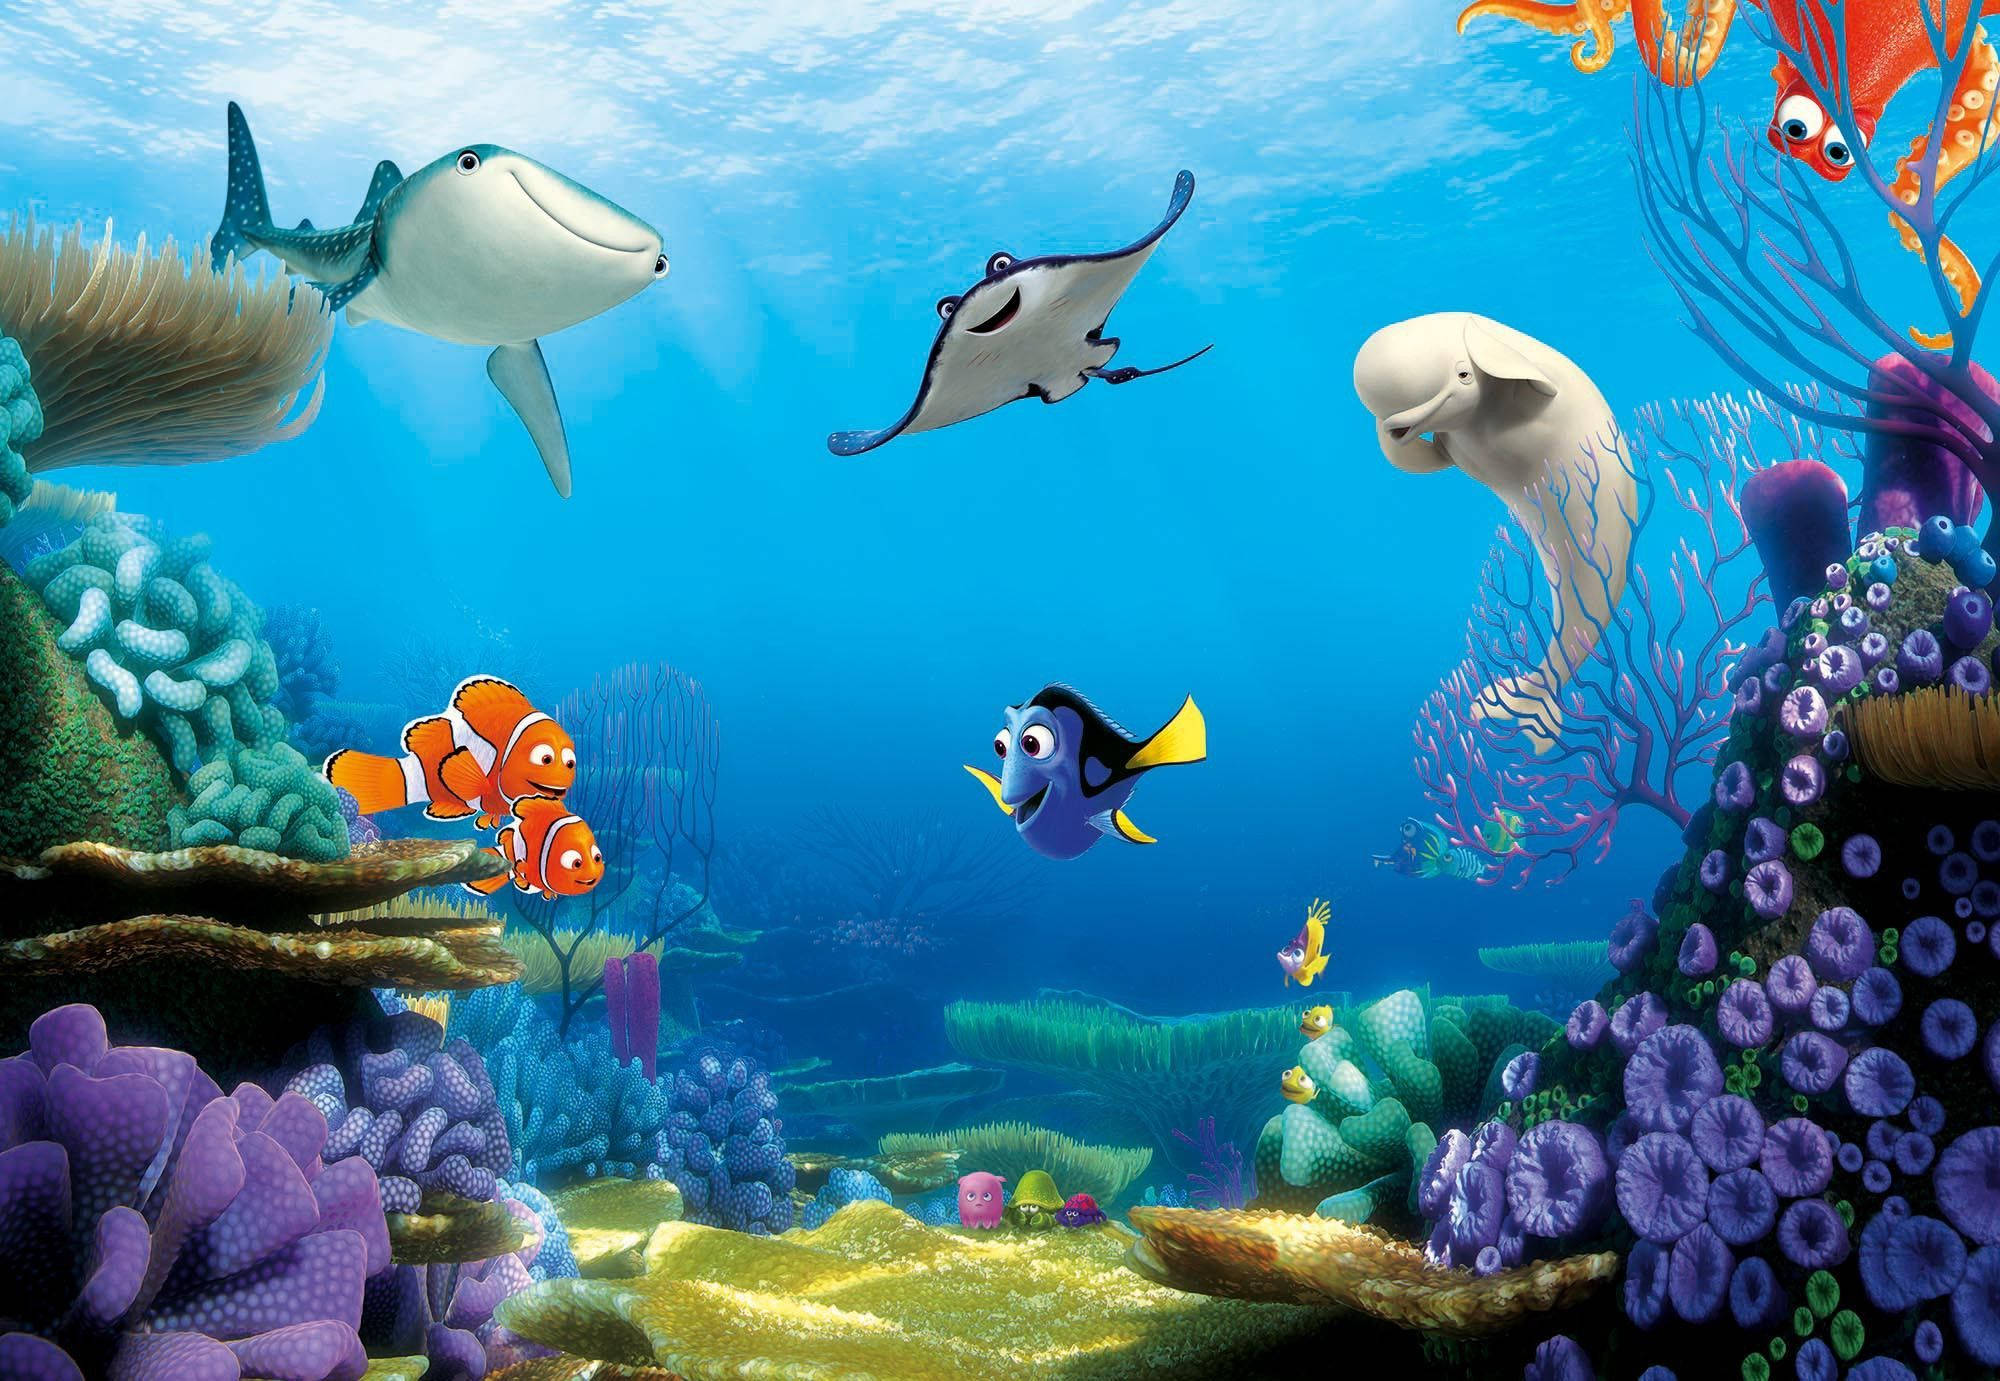 100+] Finding Nemo Pictures | Wallpapers.com